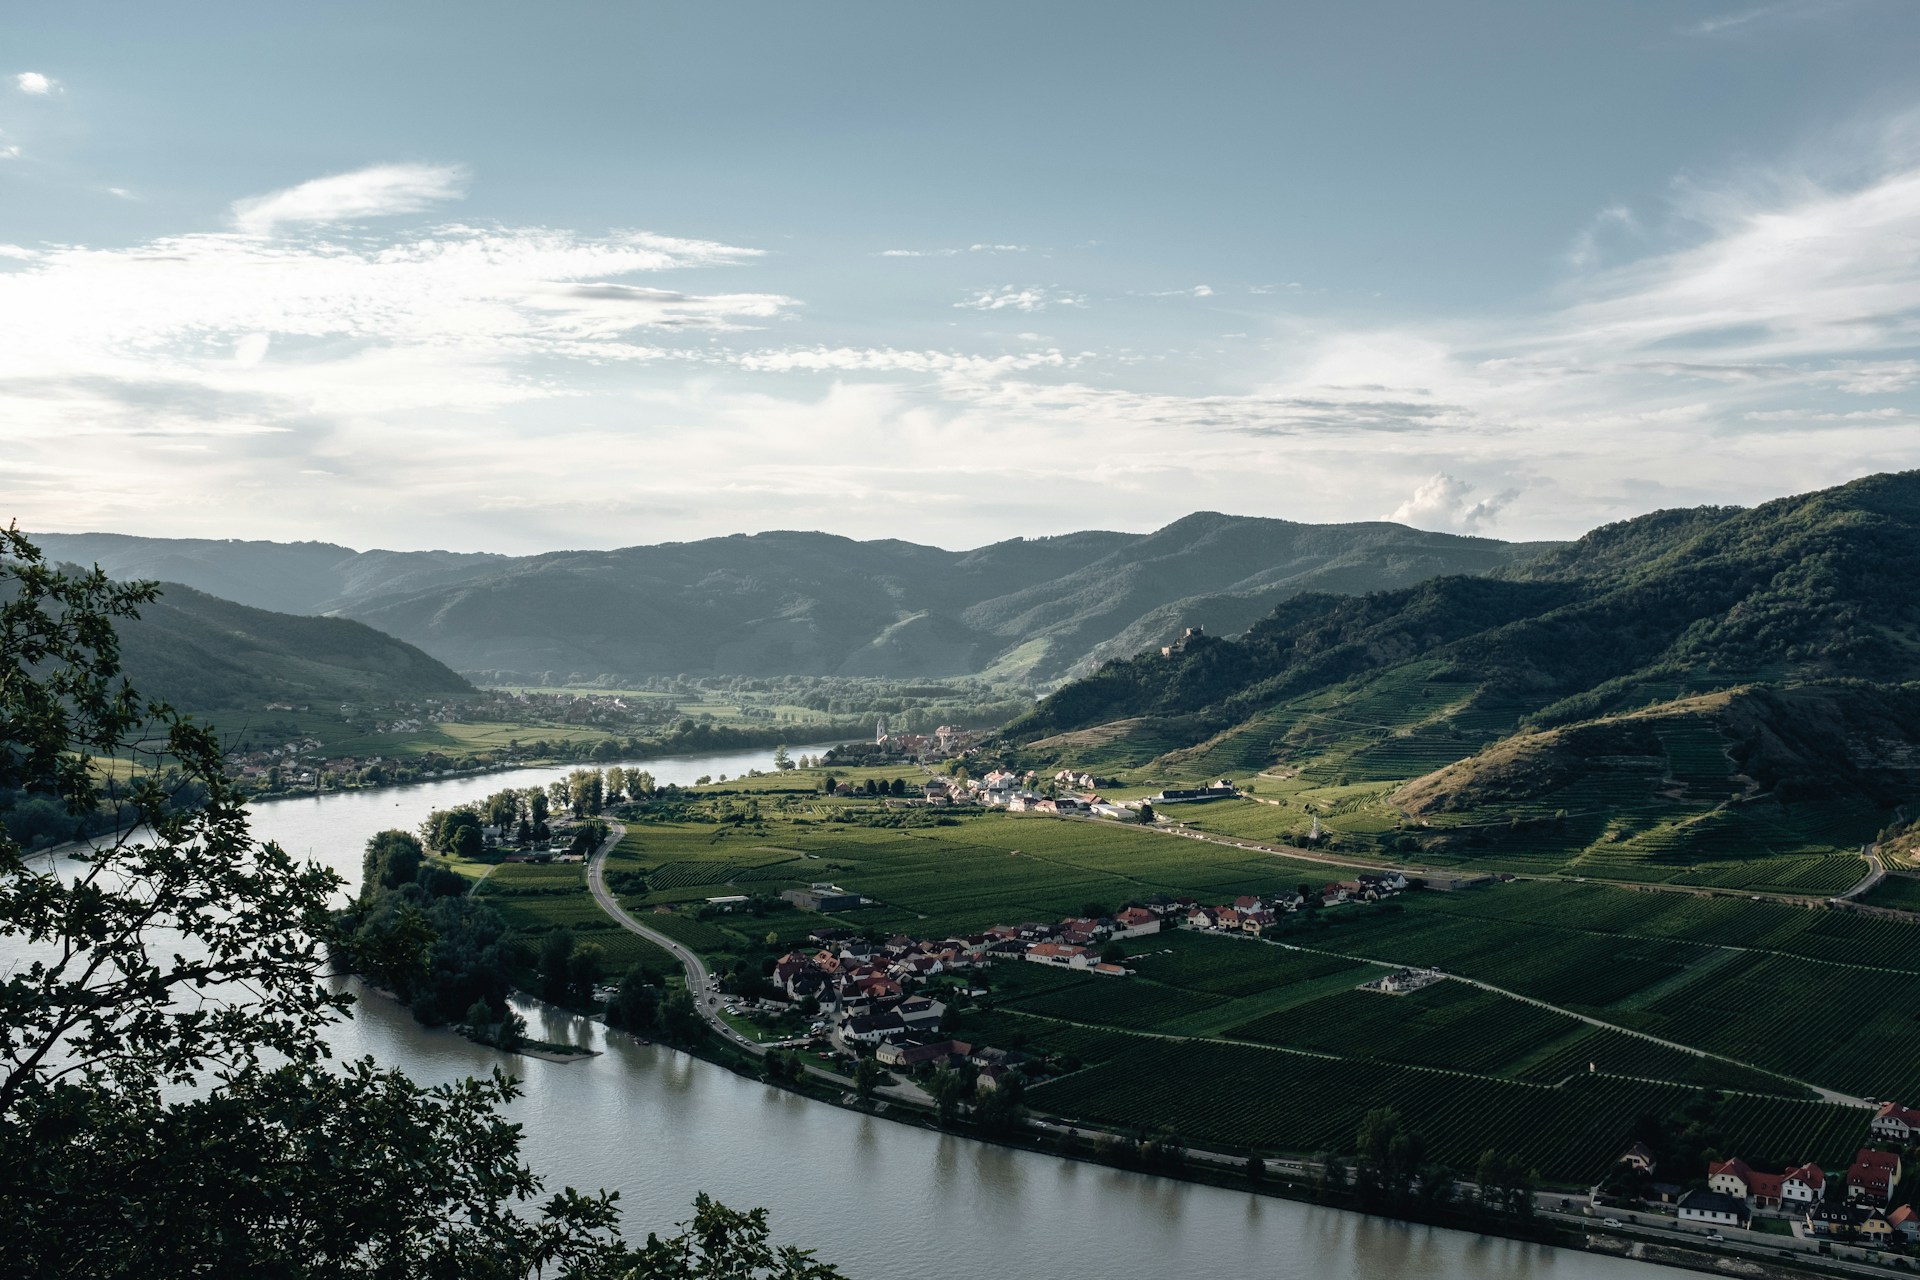 The Danube River running through the countryside